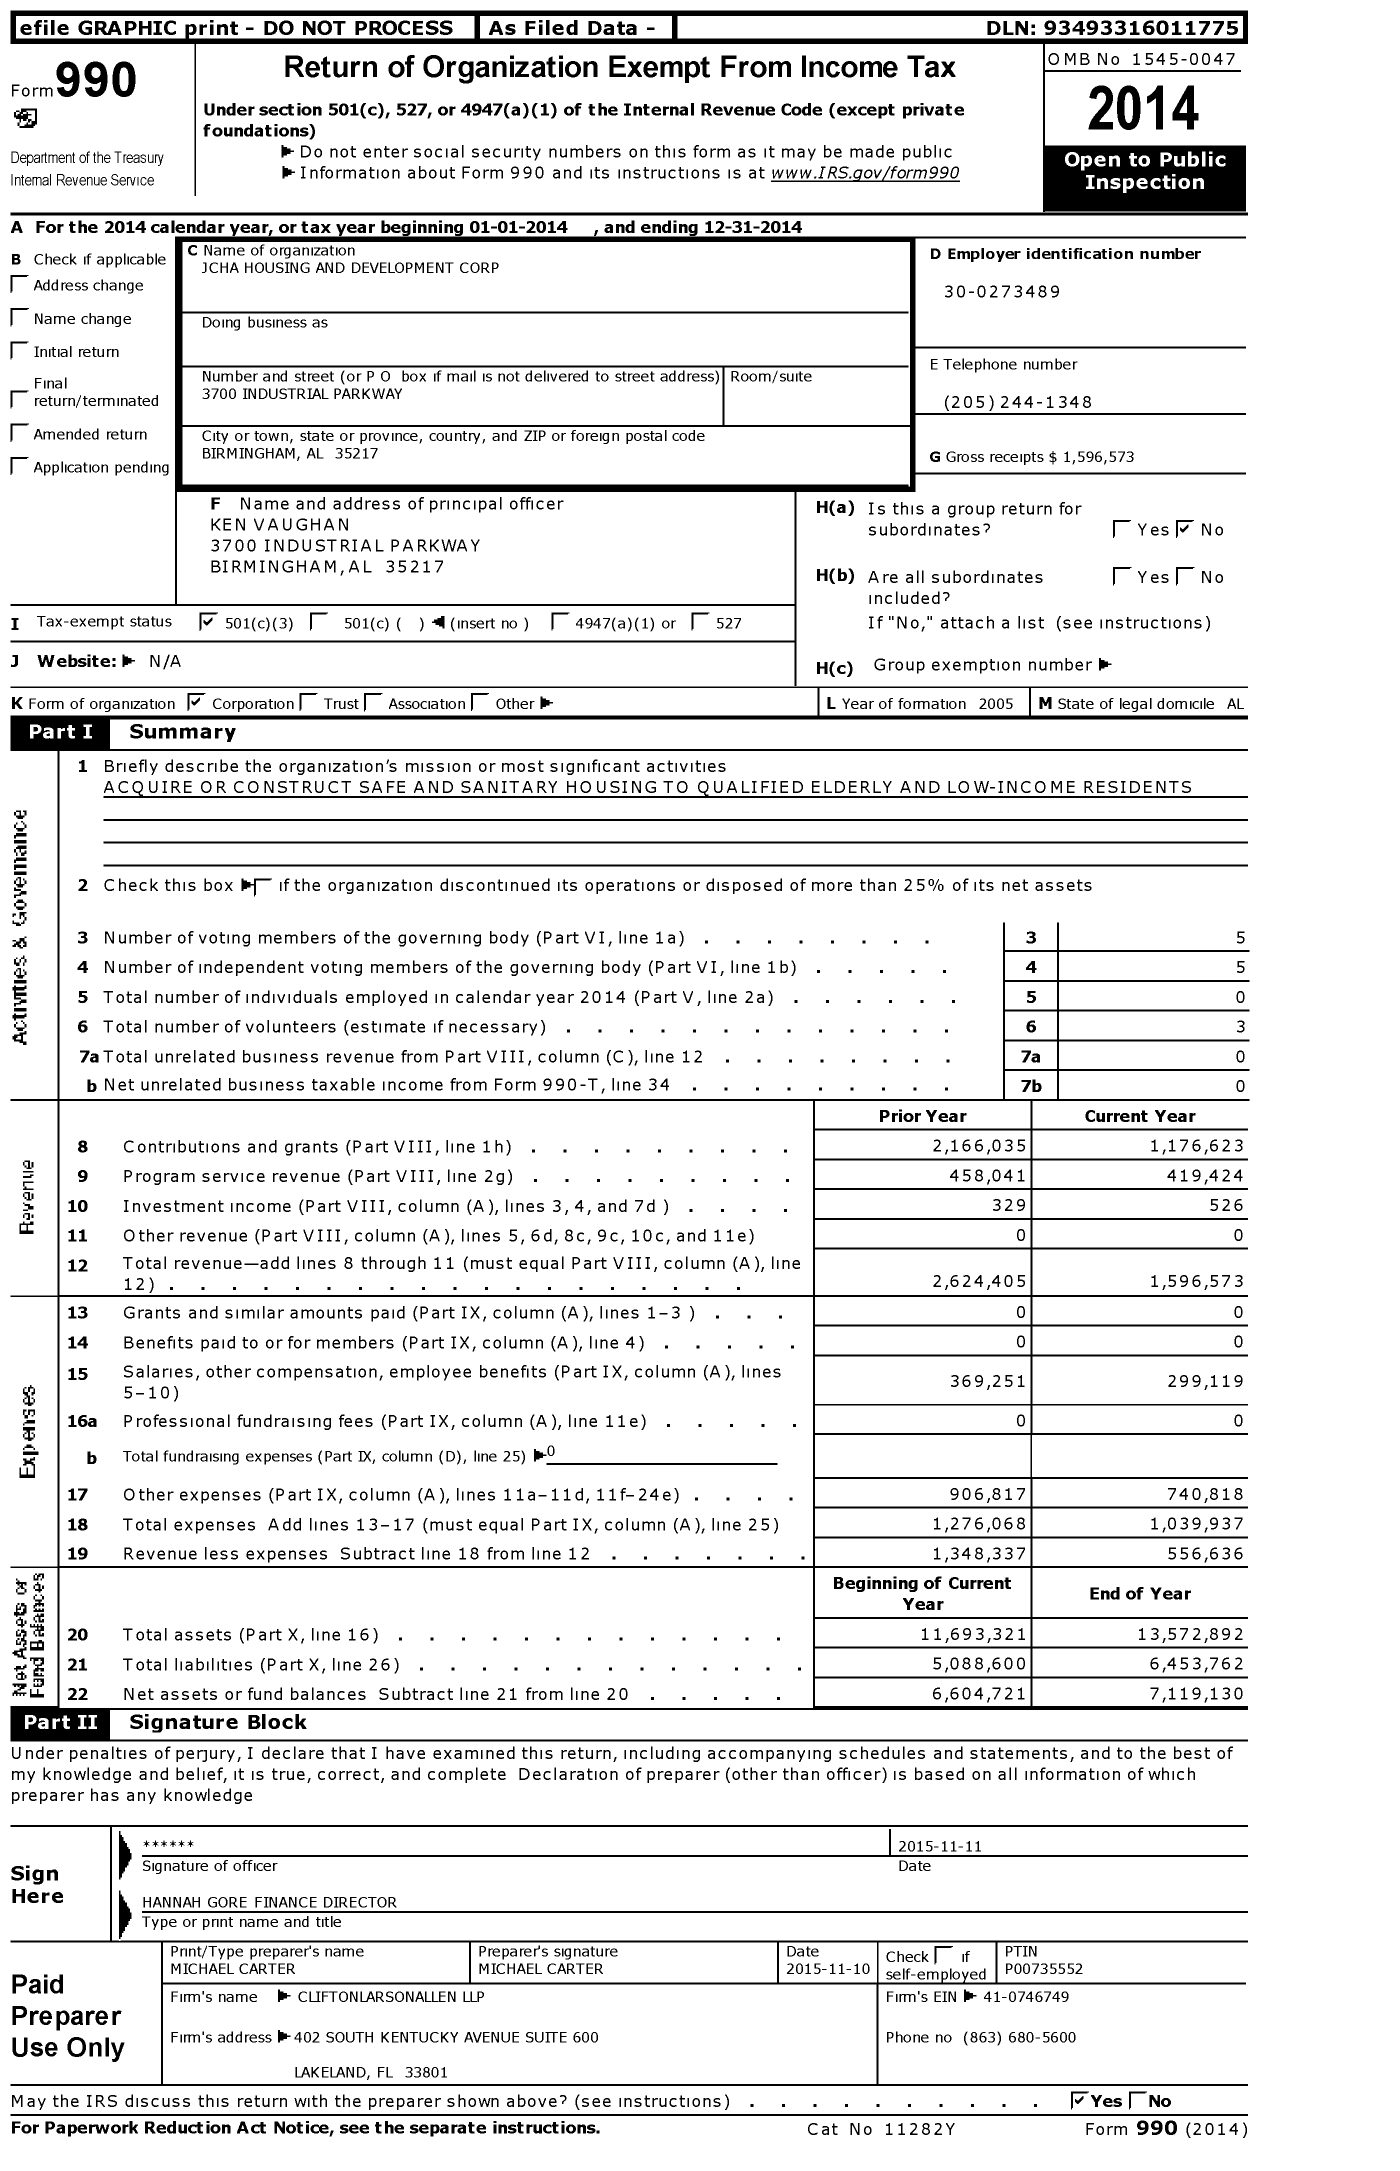 Image of first page of 2014 Form 990 for JCHA Housing and Development Corporation